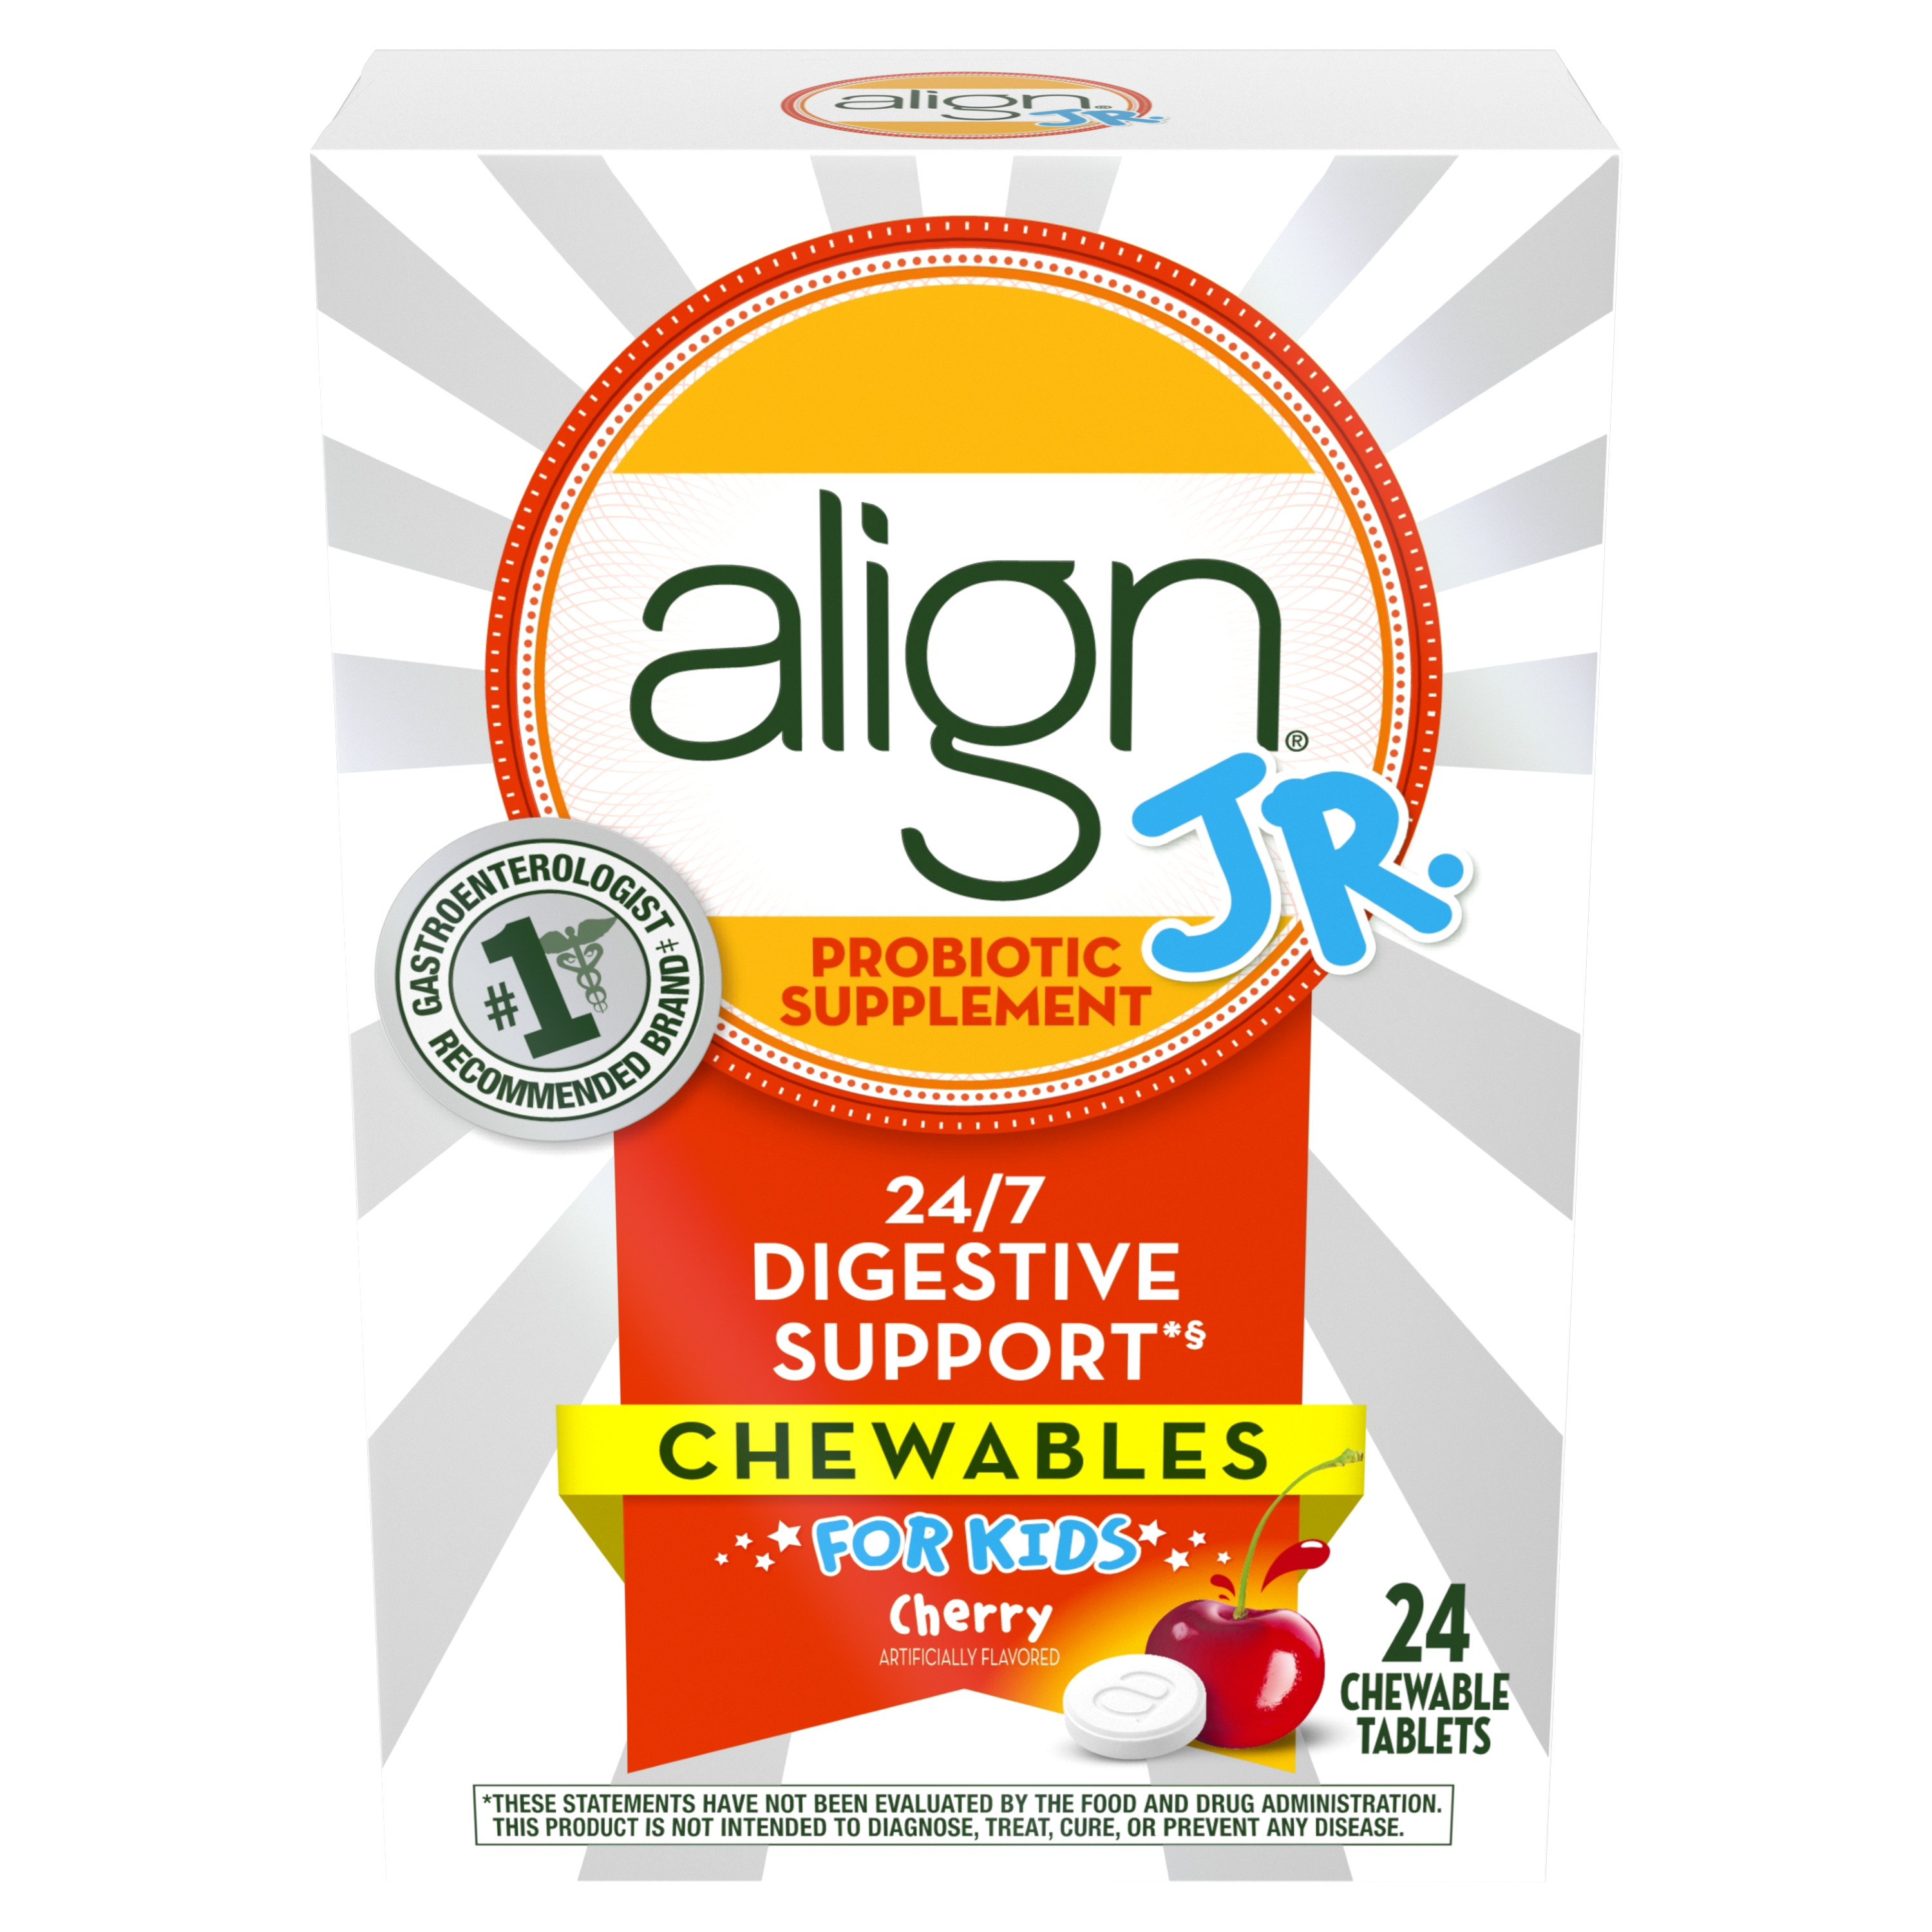 Align Jr. Chewables for Children, Daily Probiotic Supplement for Kids Digestive Health, Cherry Smoothie Flavor, 24 count, #1 Recommended Probiotic by Brand by Doctors - image 5 of 6